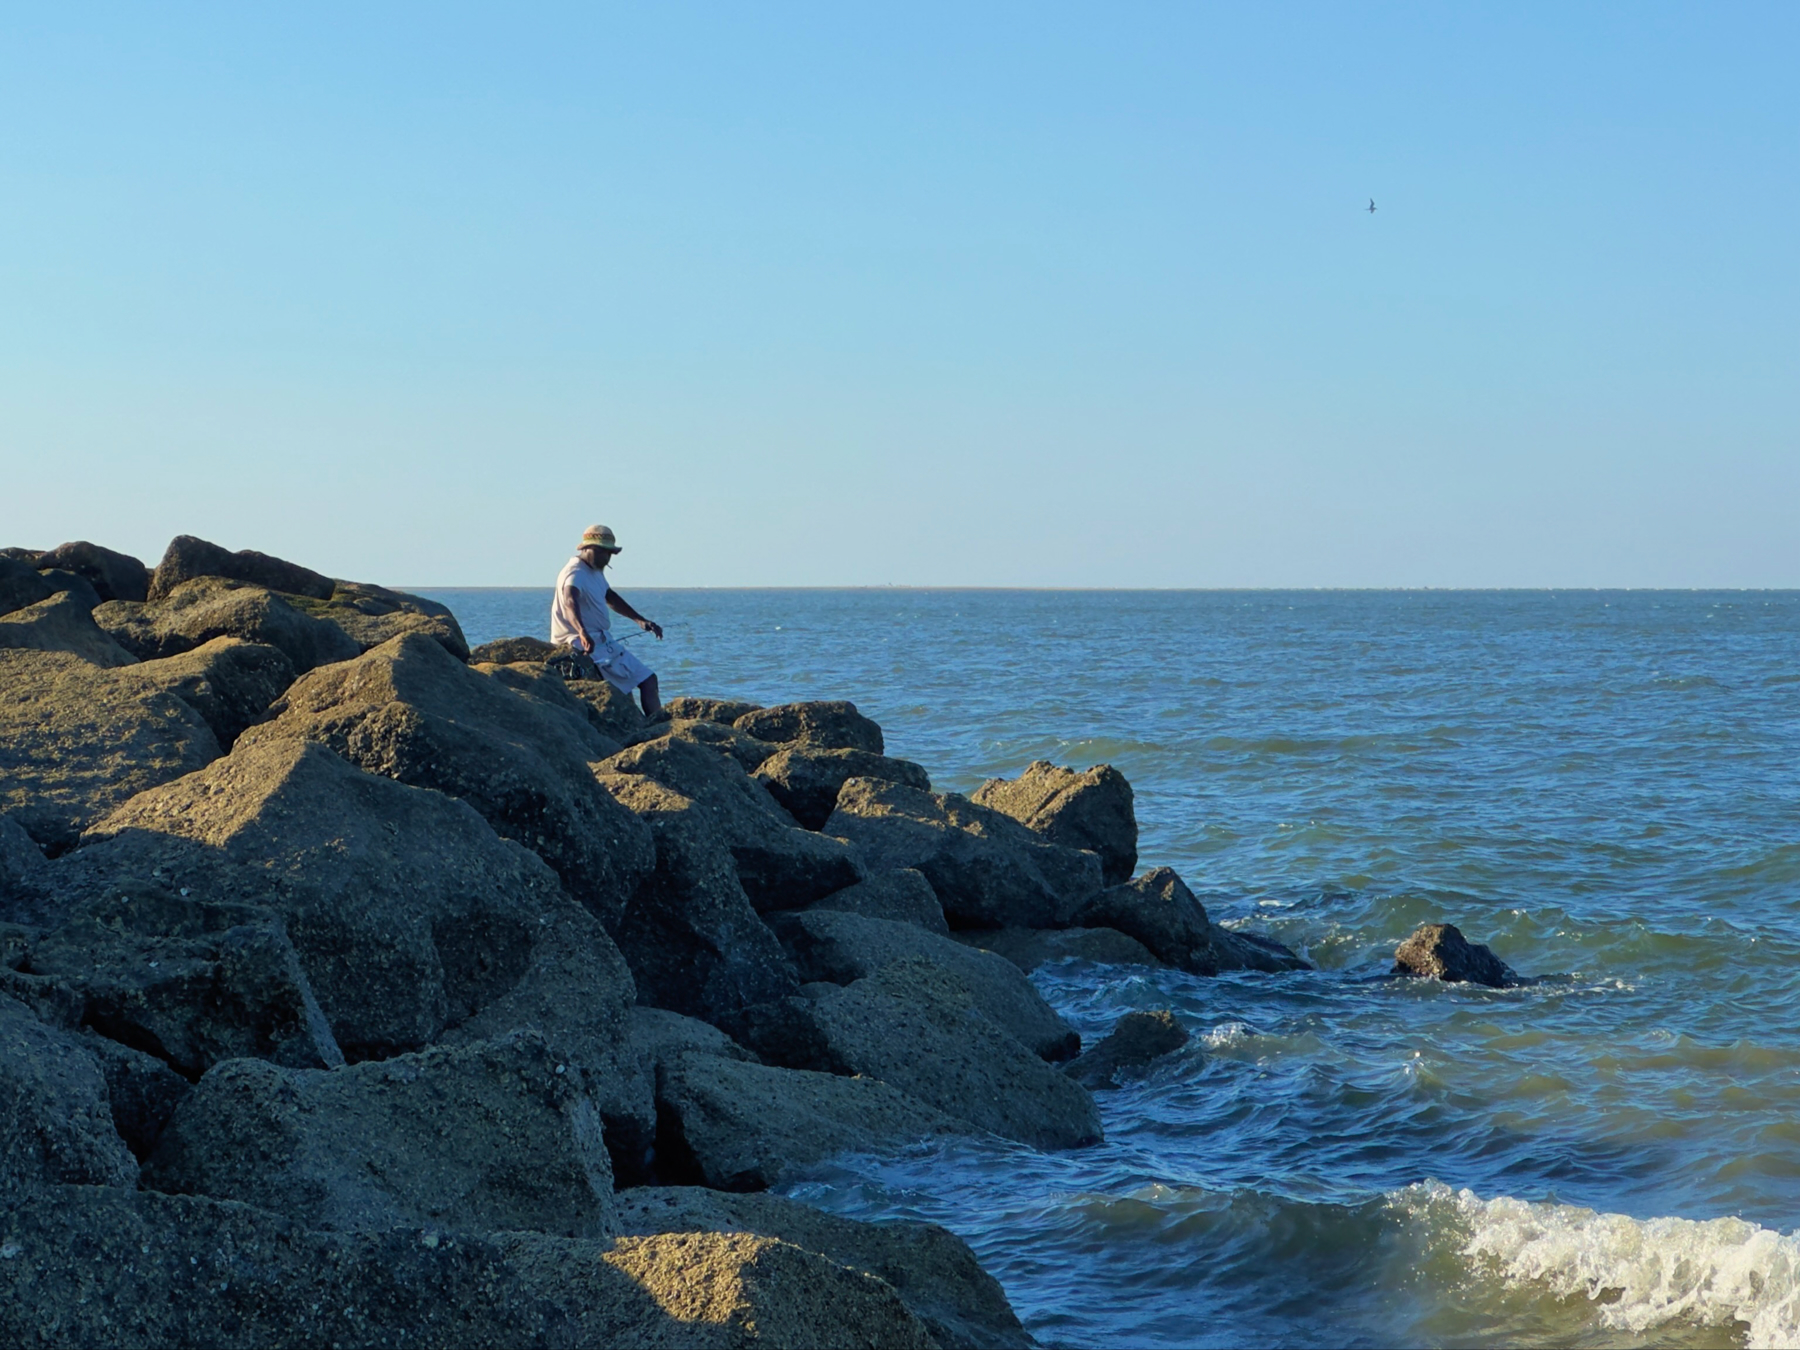 A man sits fishing on a pile of rocks that stretches into the ocean.